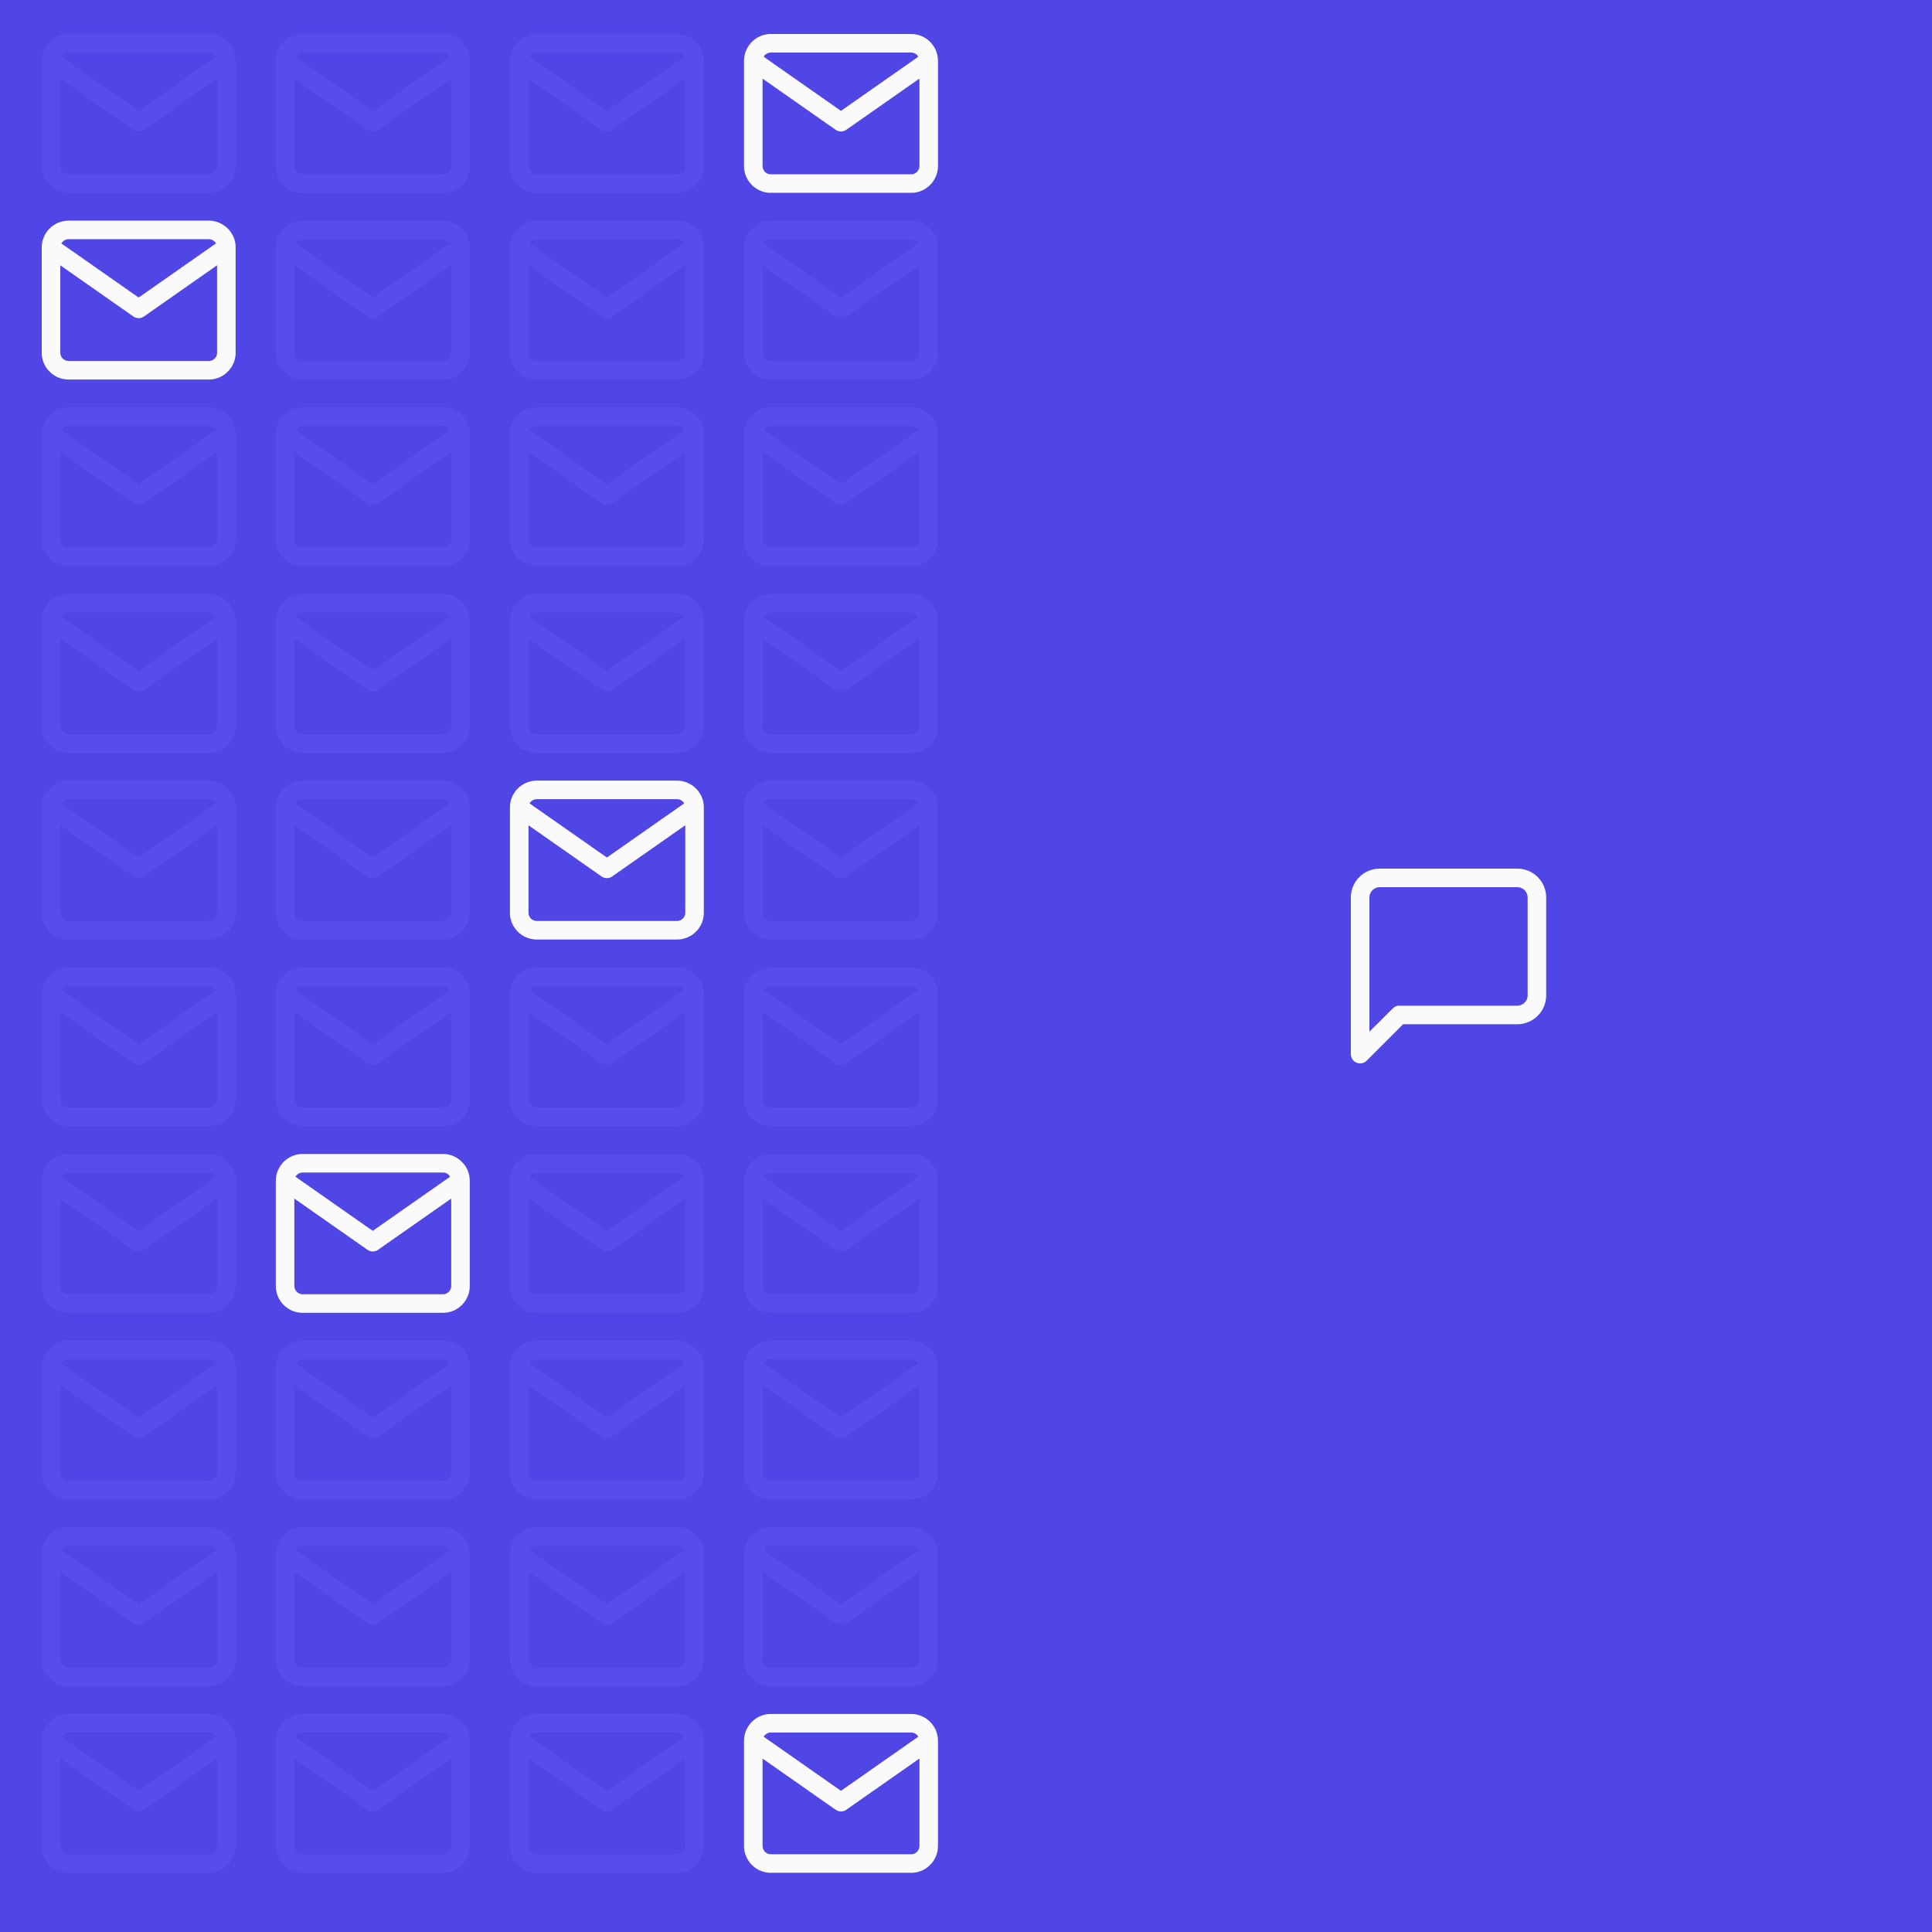 Email icons of varying opacities on the left with a single text message bubble on the right with a purple background.